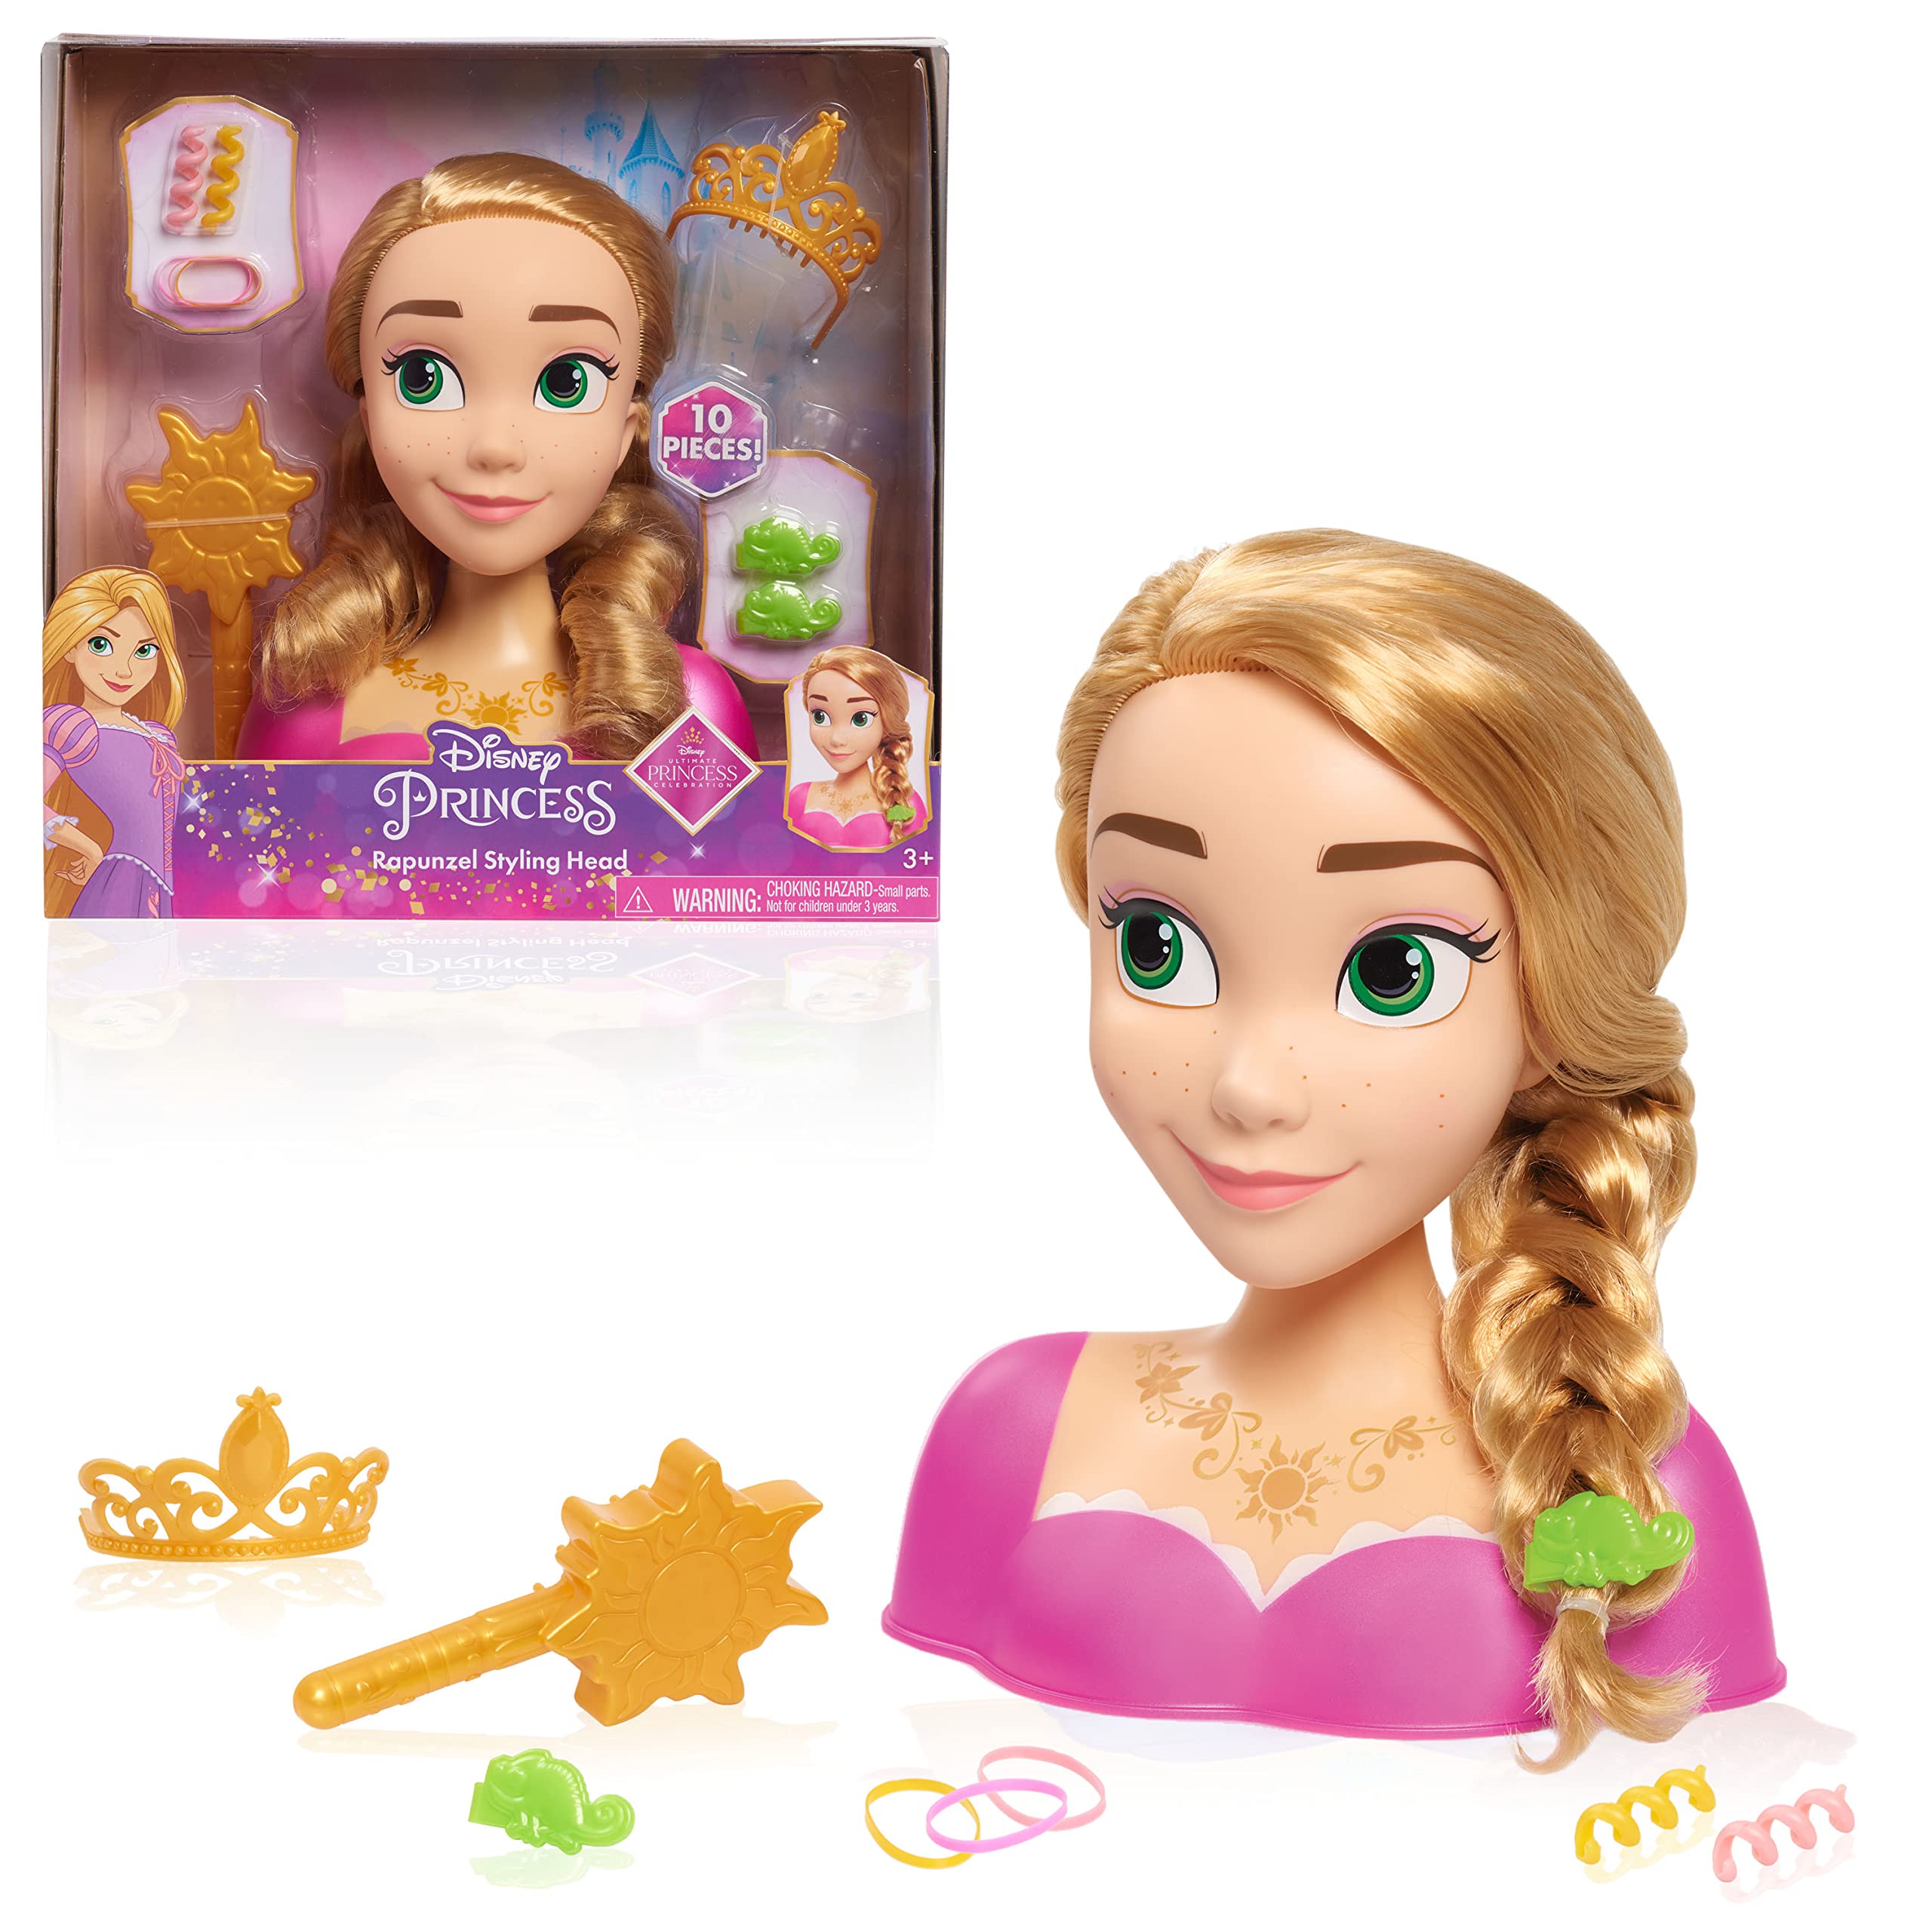 Disney Princess Rapunzel Styling Head, Blonde Hair, 10 Piece Pretend Play Set, Tangled, by Just Play Basic Rapunzel Styling Head Multi-color